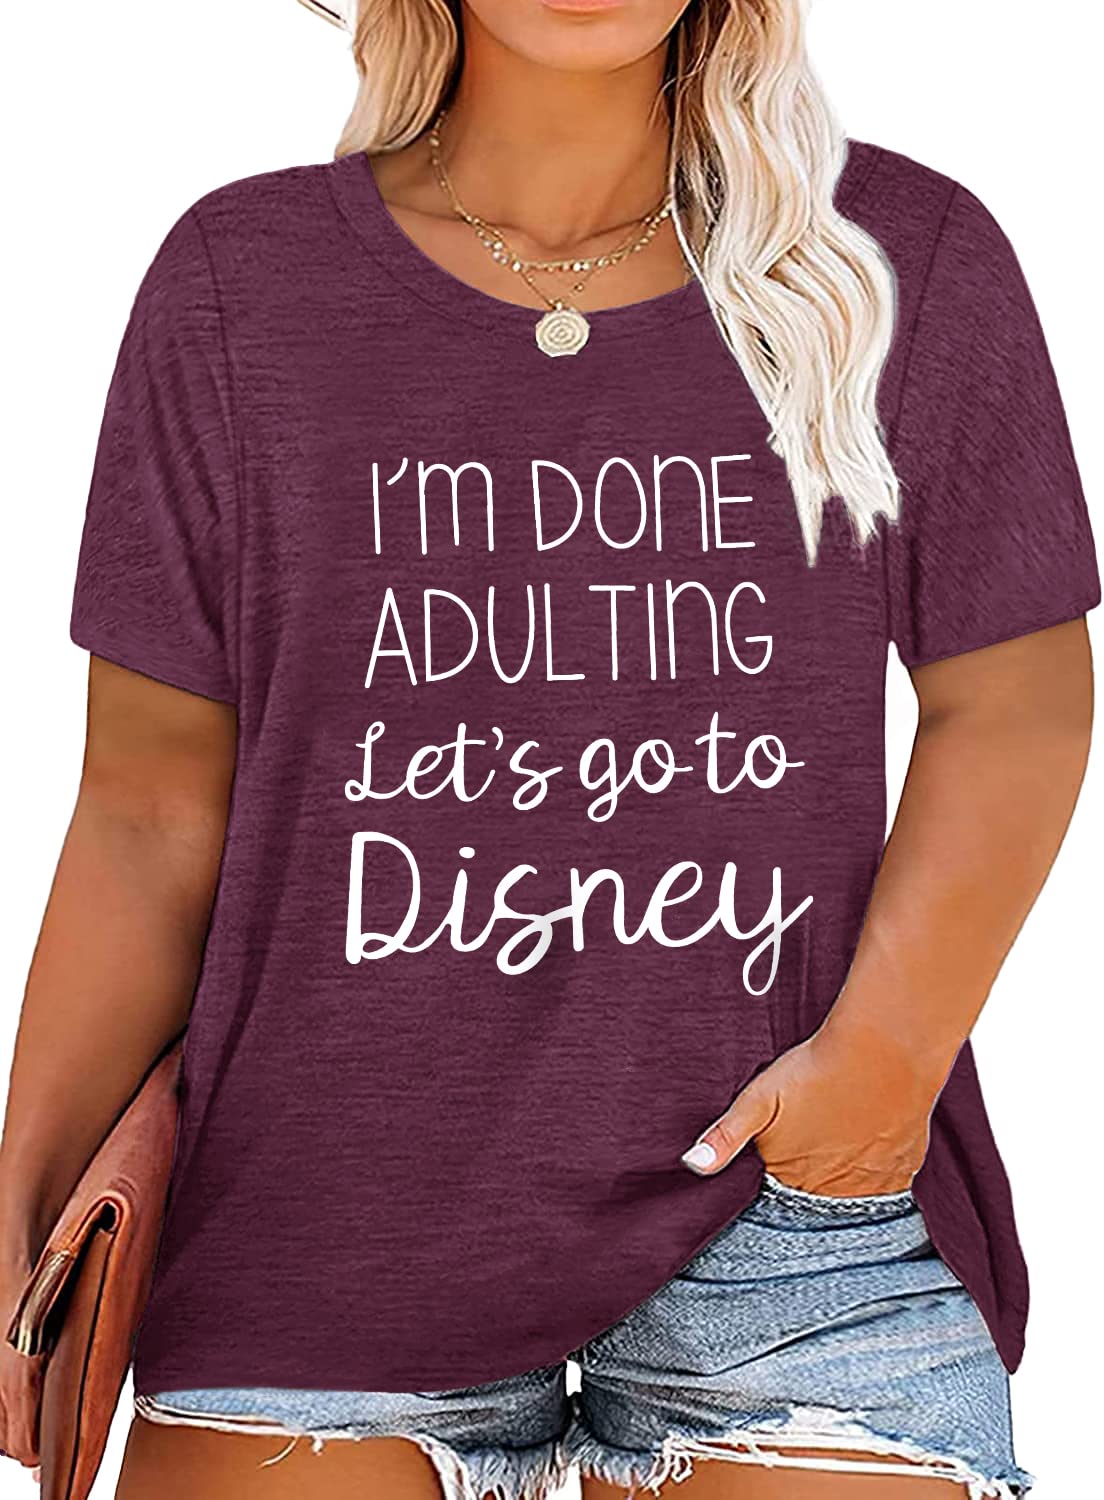 Anbech Women I'm Done Adulting Let's Go to Tshirt Plus Size Funny ...